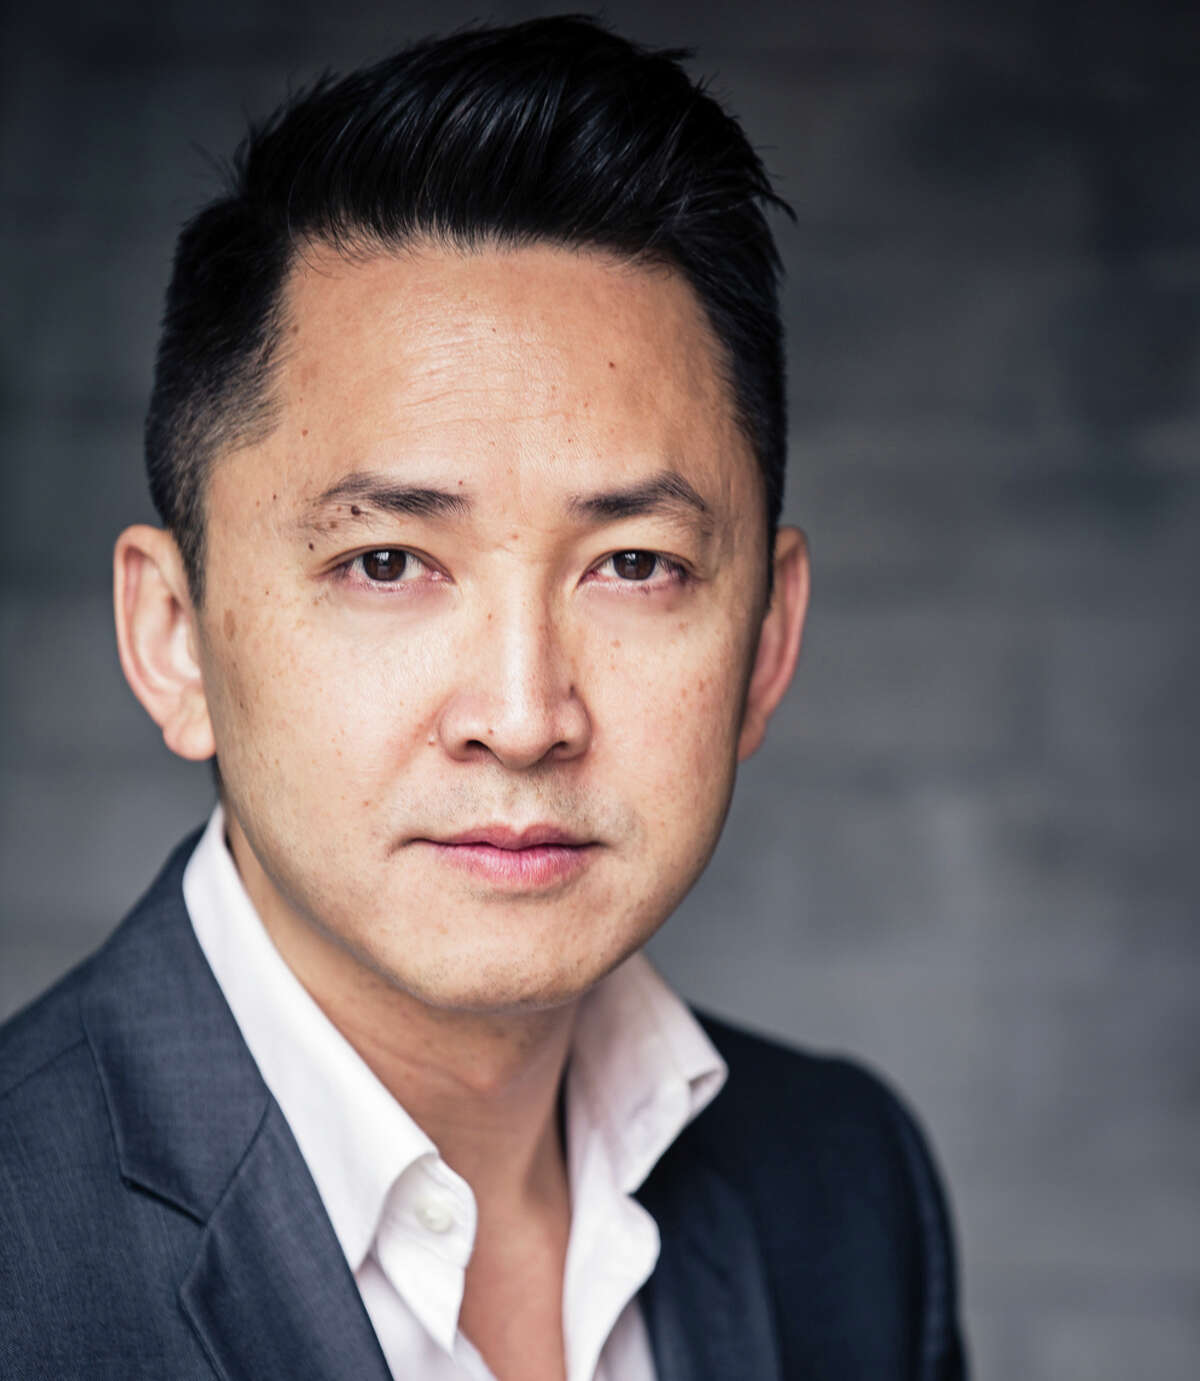 Viet Thanh Nguyen, author of “The Sympathizer.”